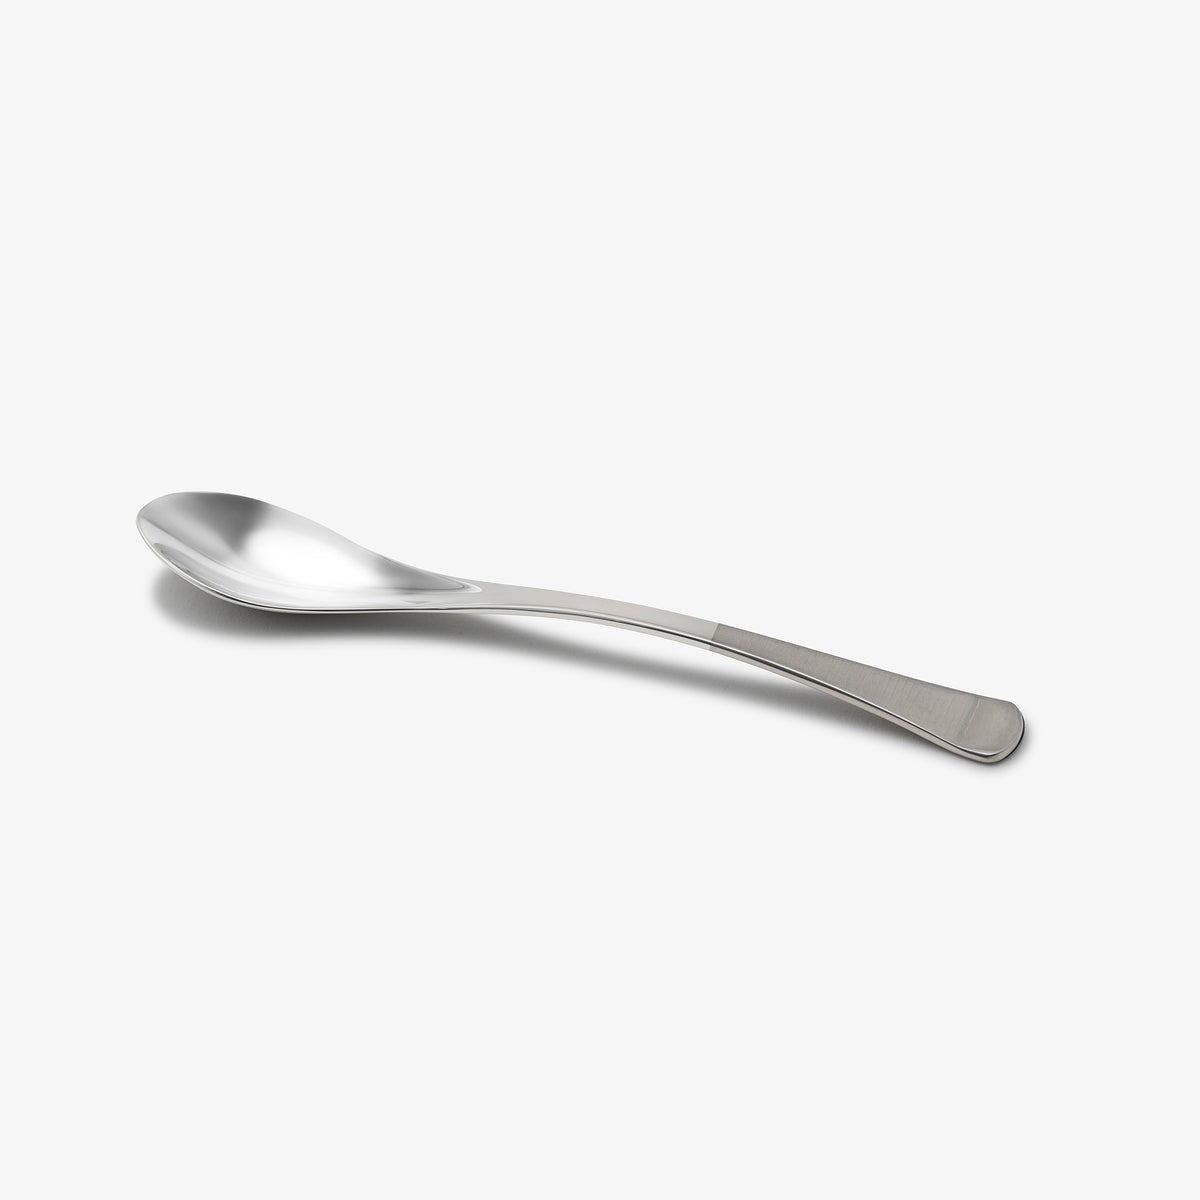 Small_Spoons_Chrome_Top_OuiChef